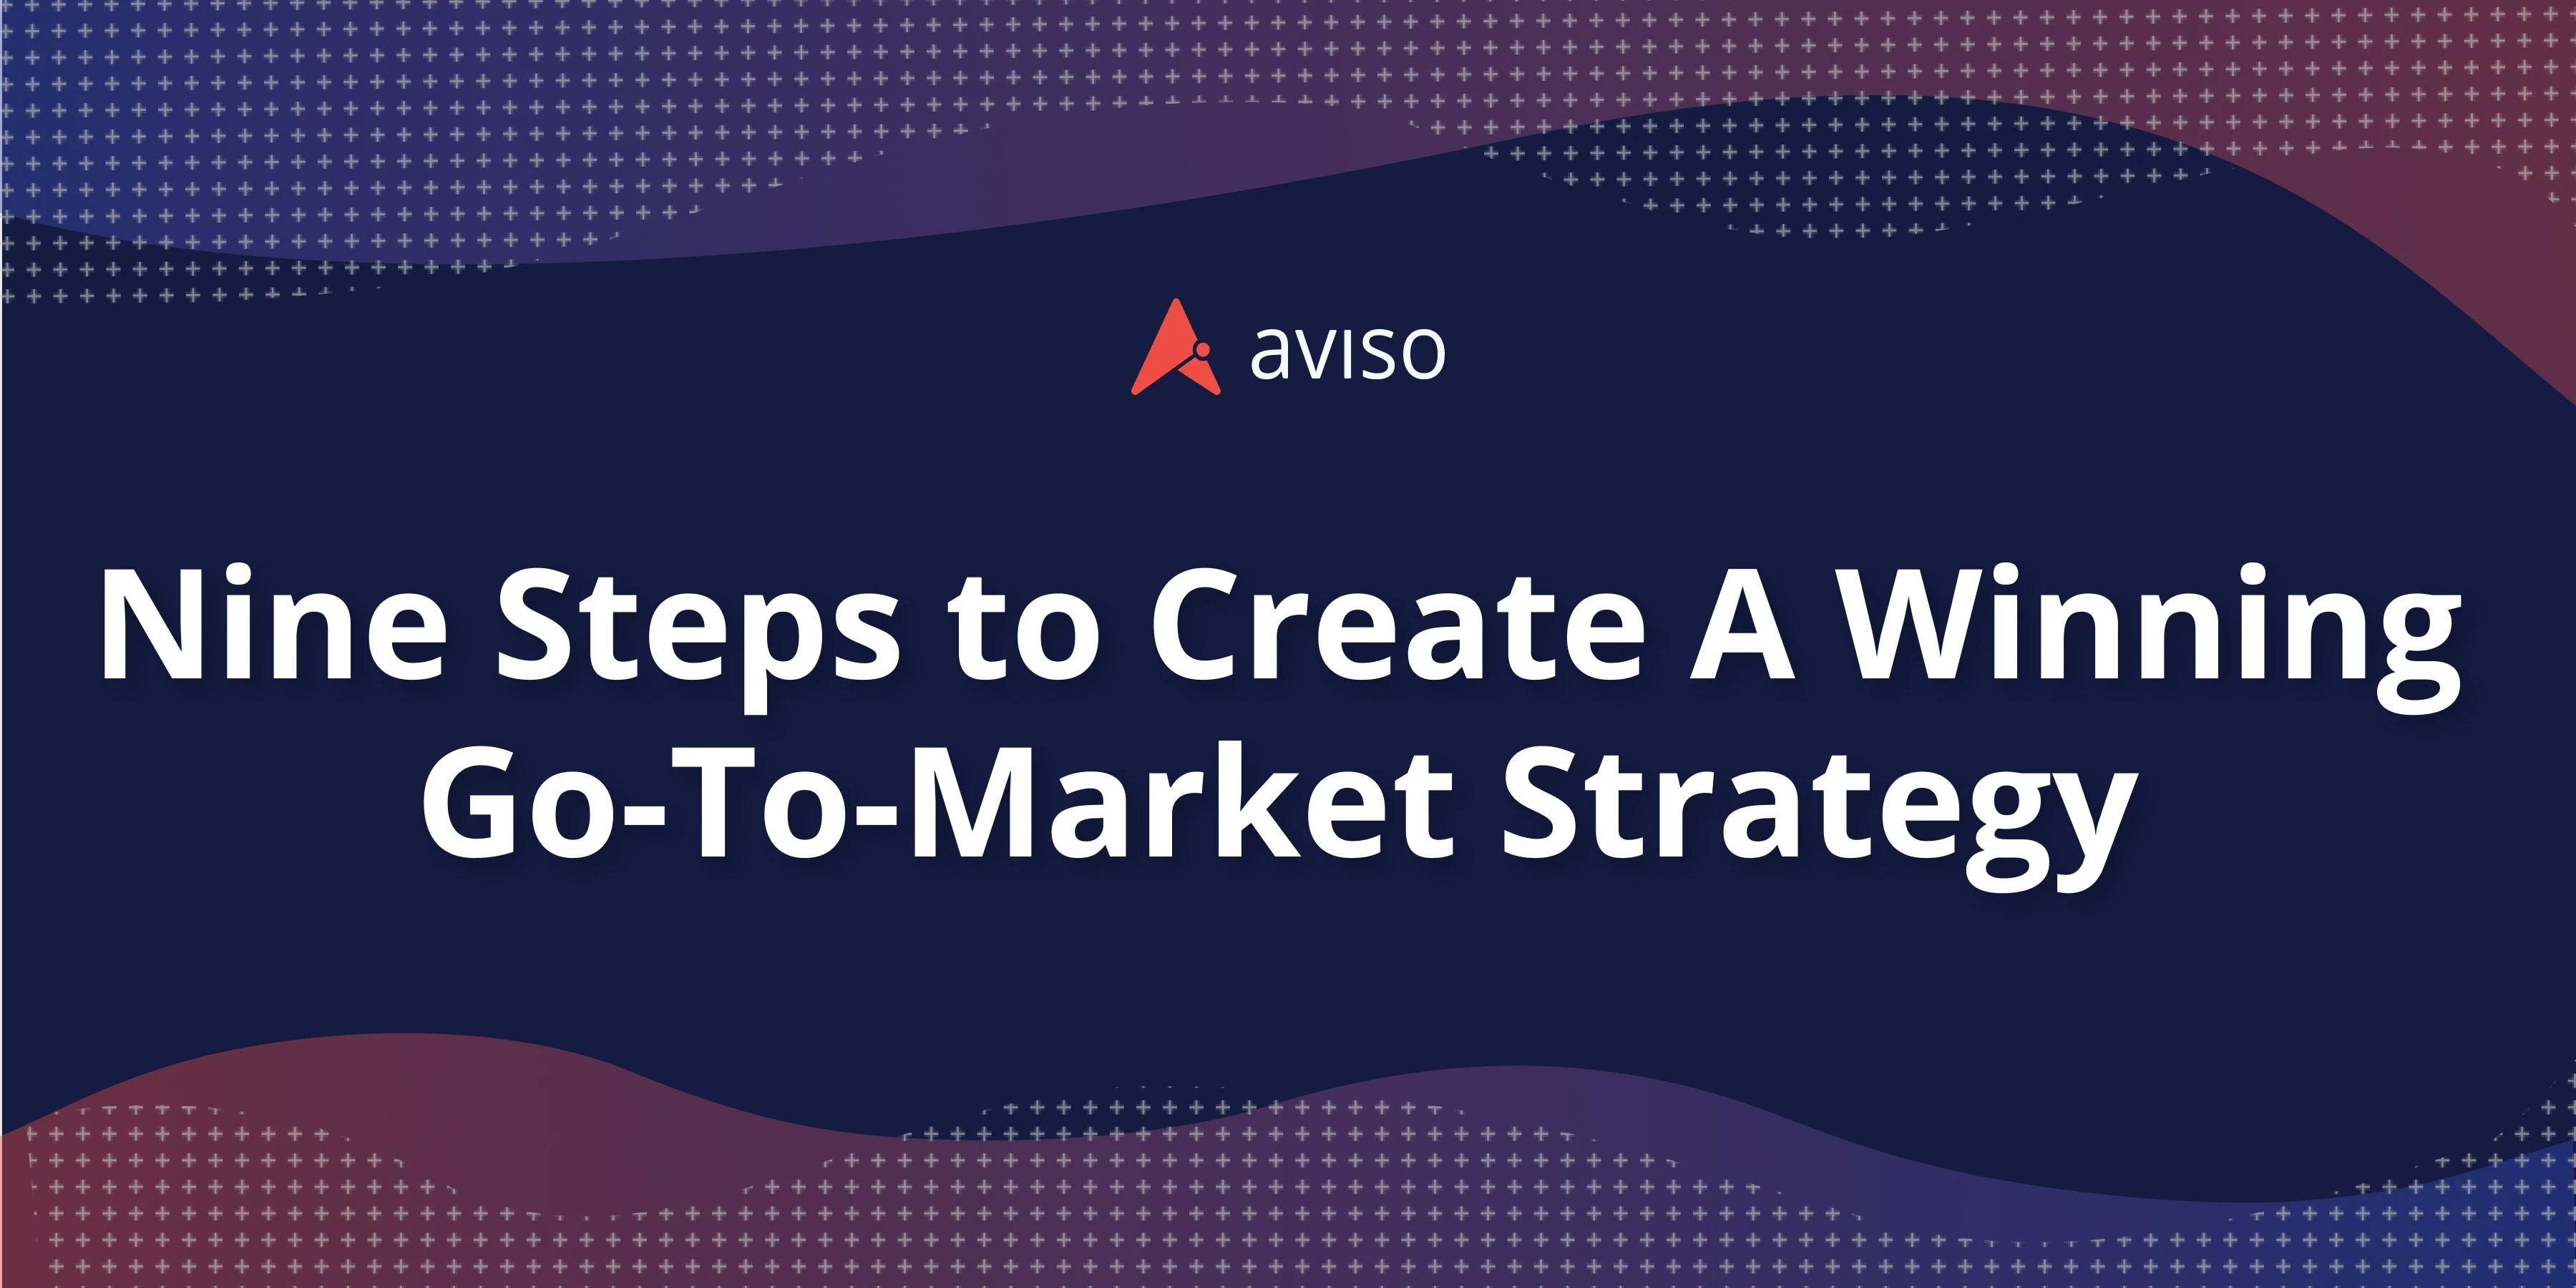 How To Create A Winning Go-To-Market Strategy?